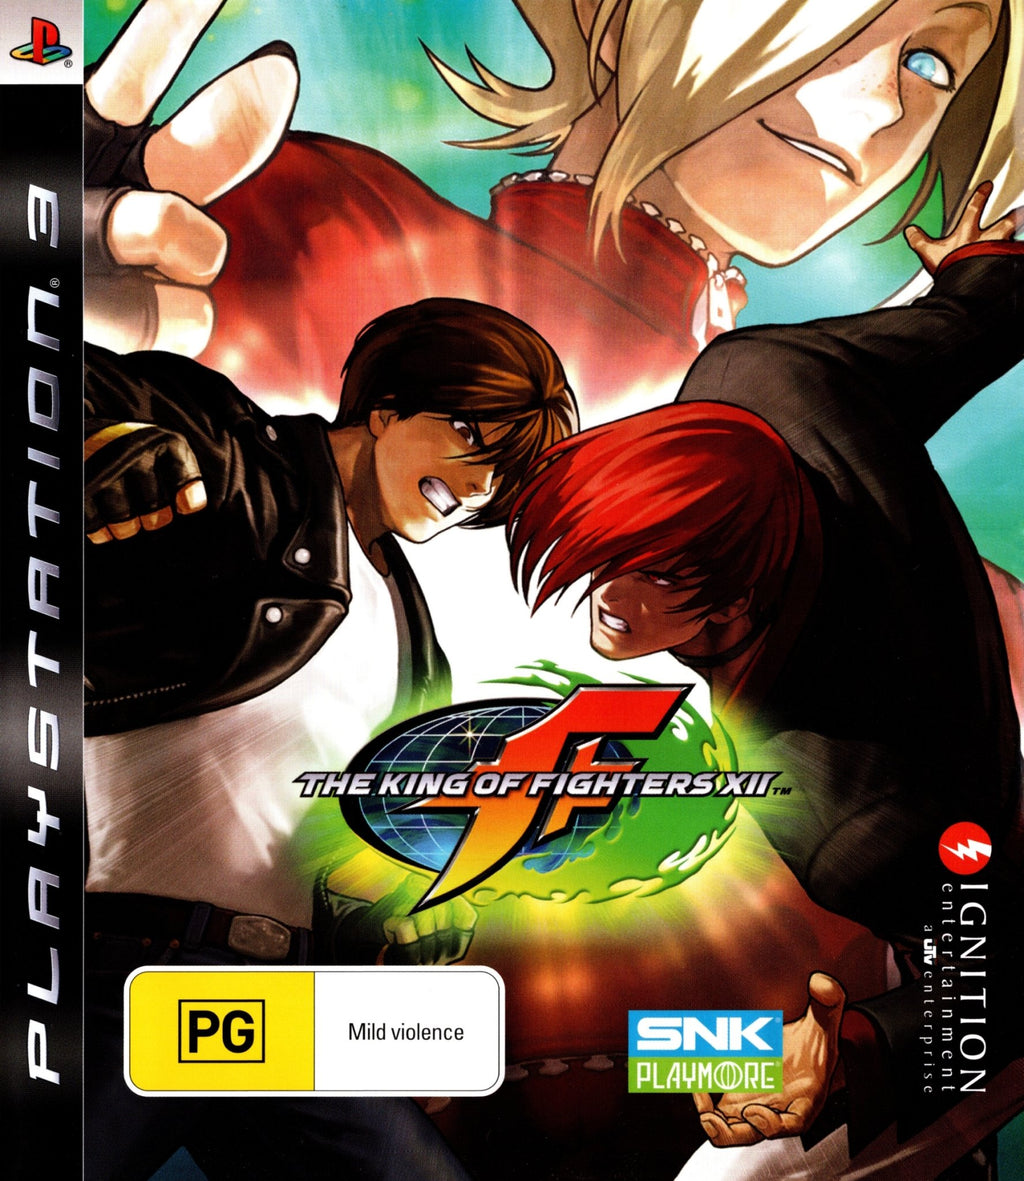 The King of Fighters XII - PS3 - Super Retro - Playstation 3